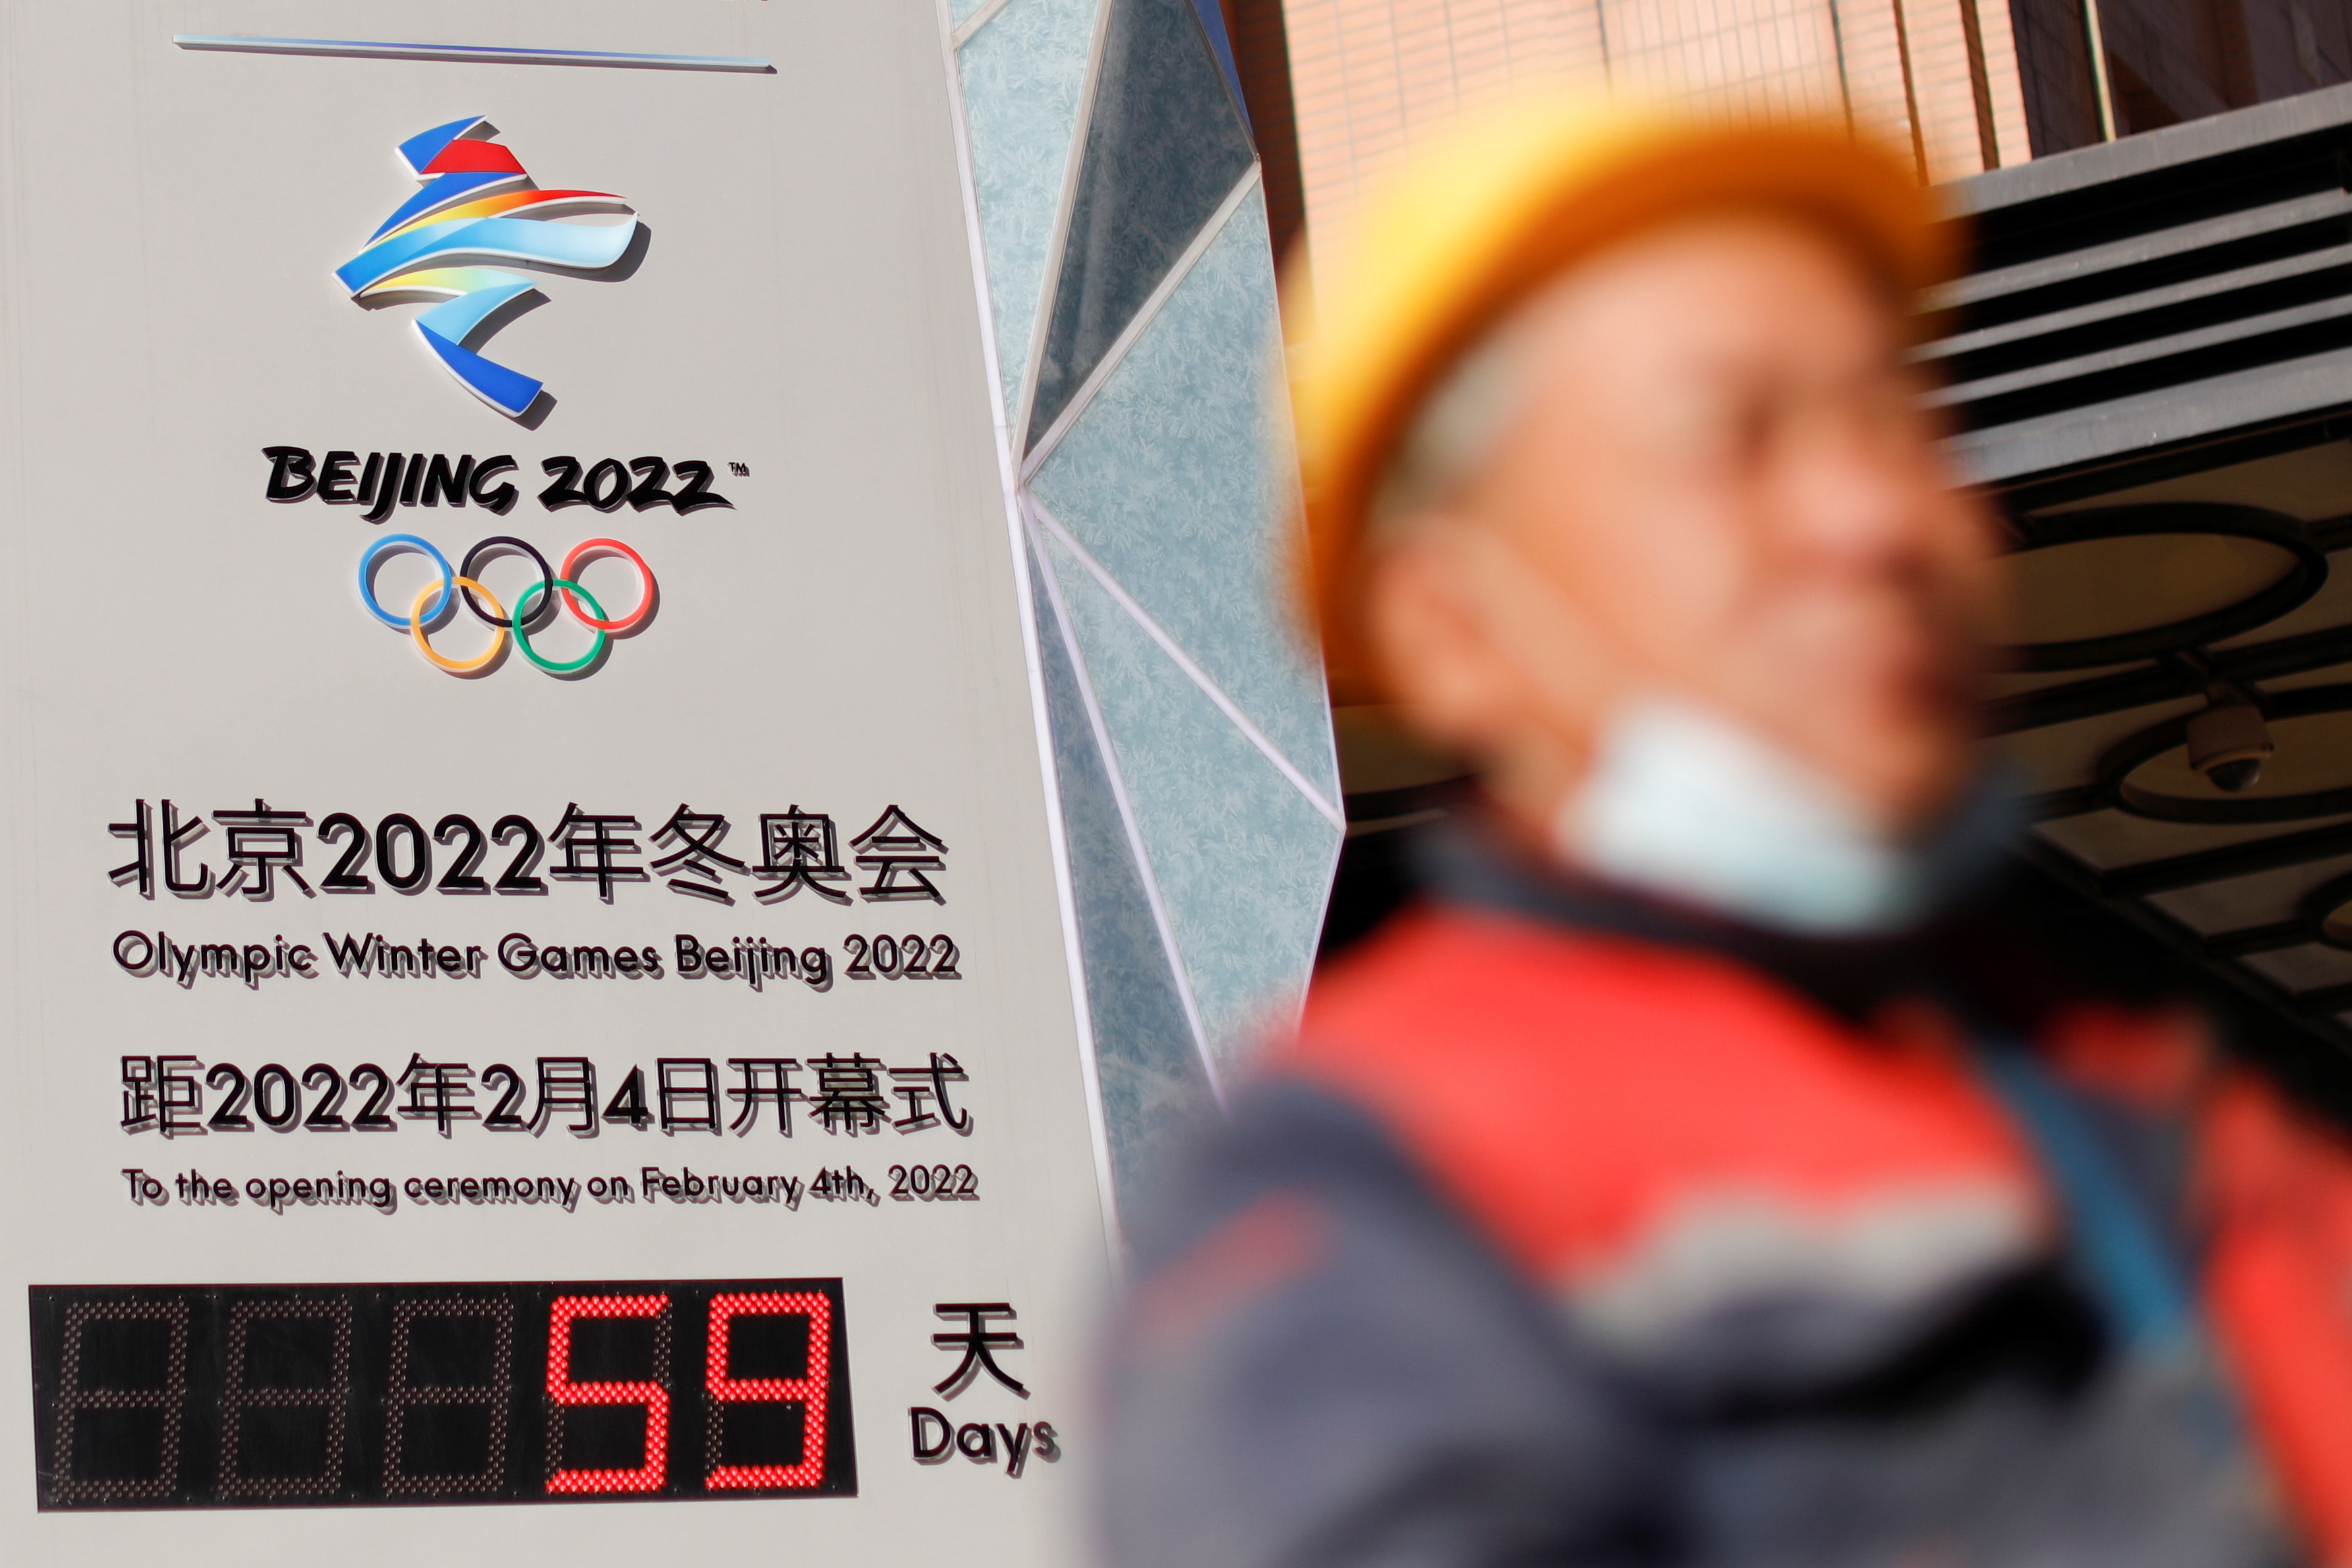 A worker walks past a countdown clock for the Beijing 2022 Winter Olympic Games in Beijing, China December 7, 2021. REUTERS/Carlos Garcia Rawlins